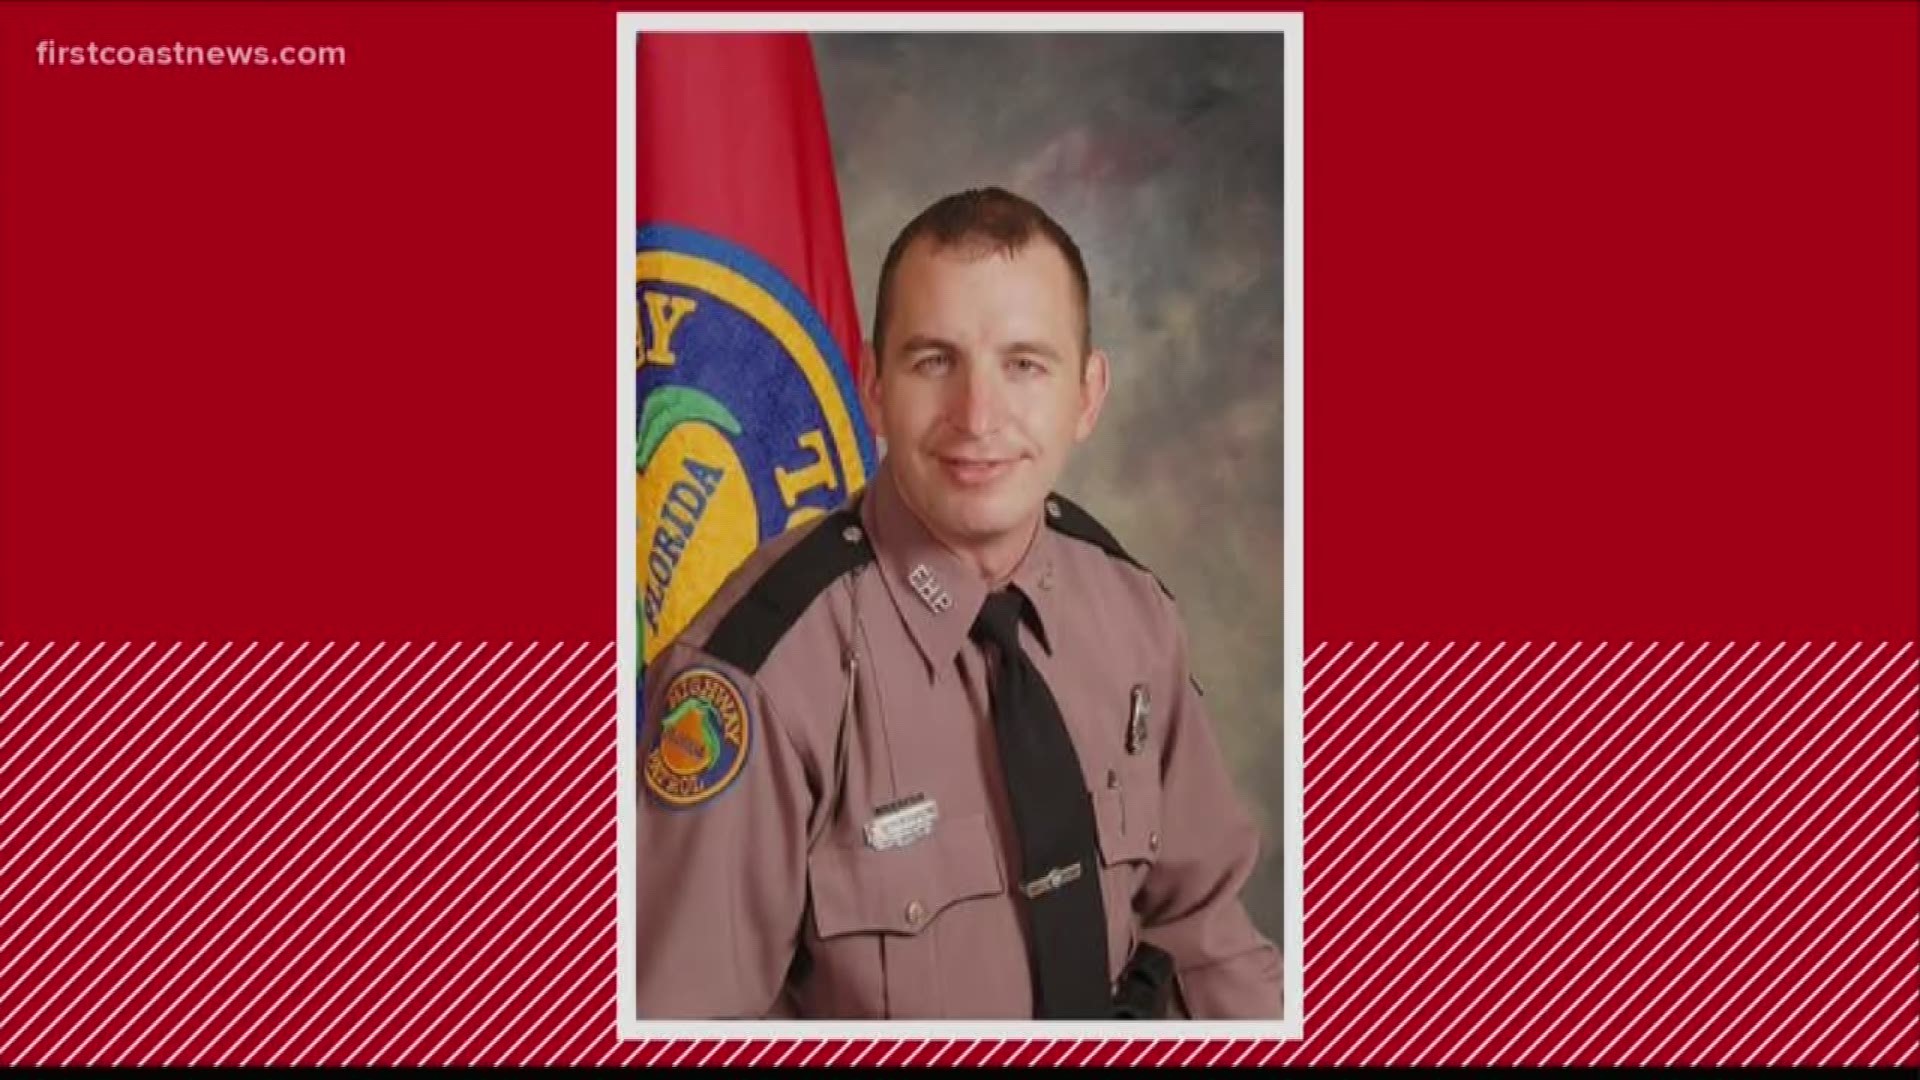 Trooper Joseph Bullock, a 19-year veteran, was gunned down and killed while assisting the public on I-95 in Martin County, the agency said.